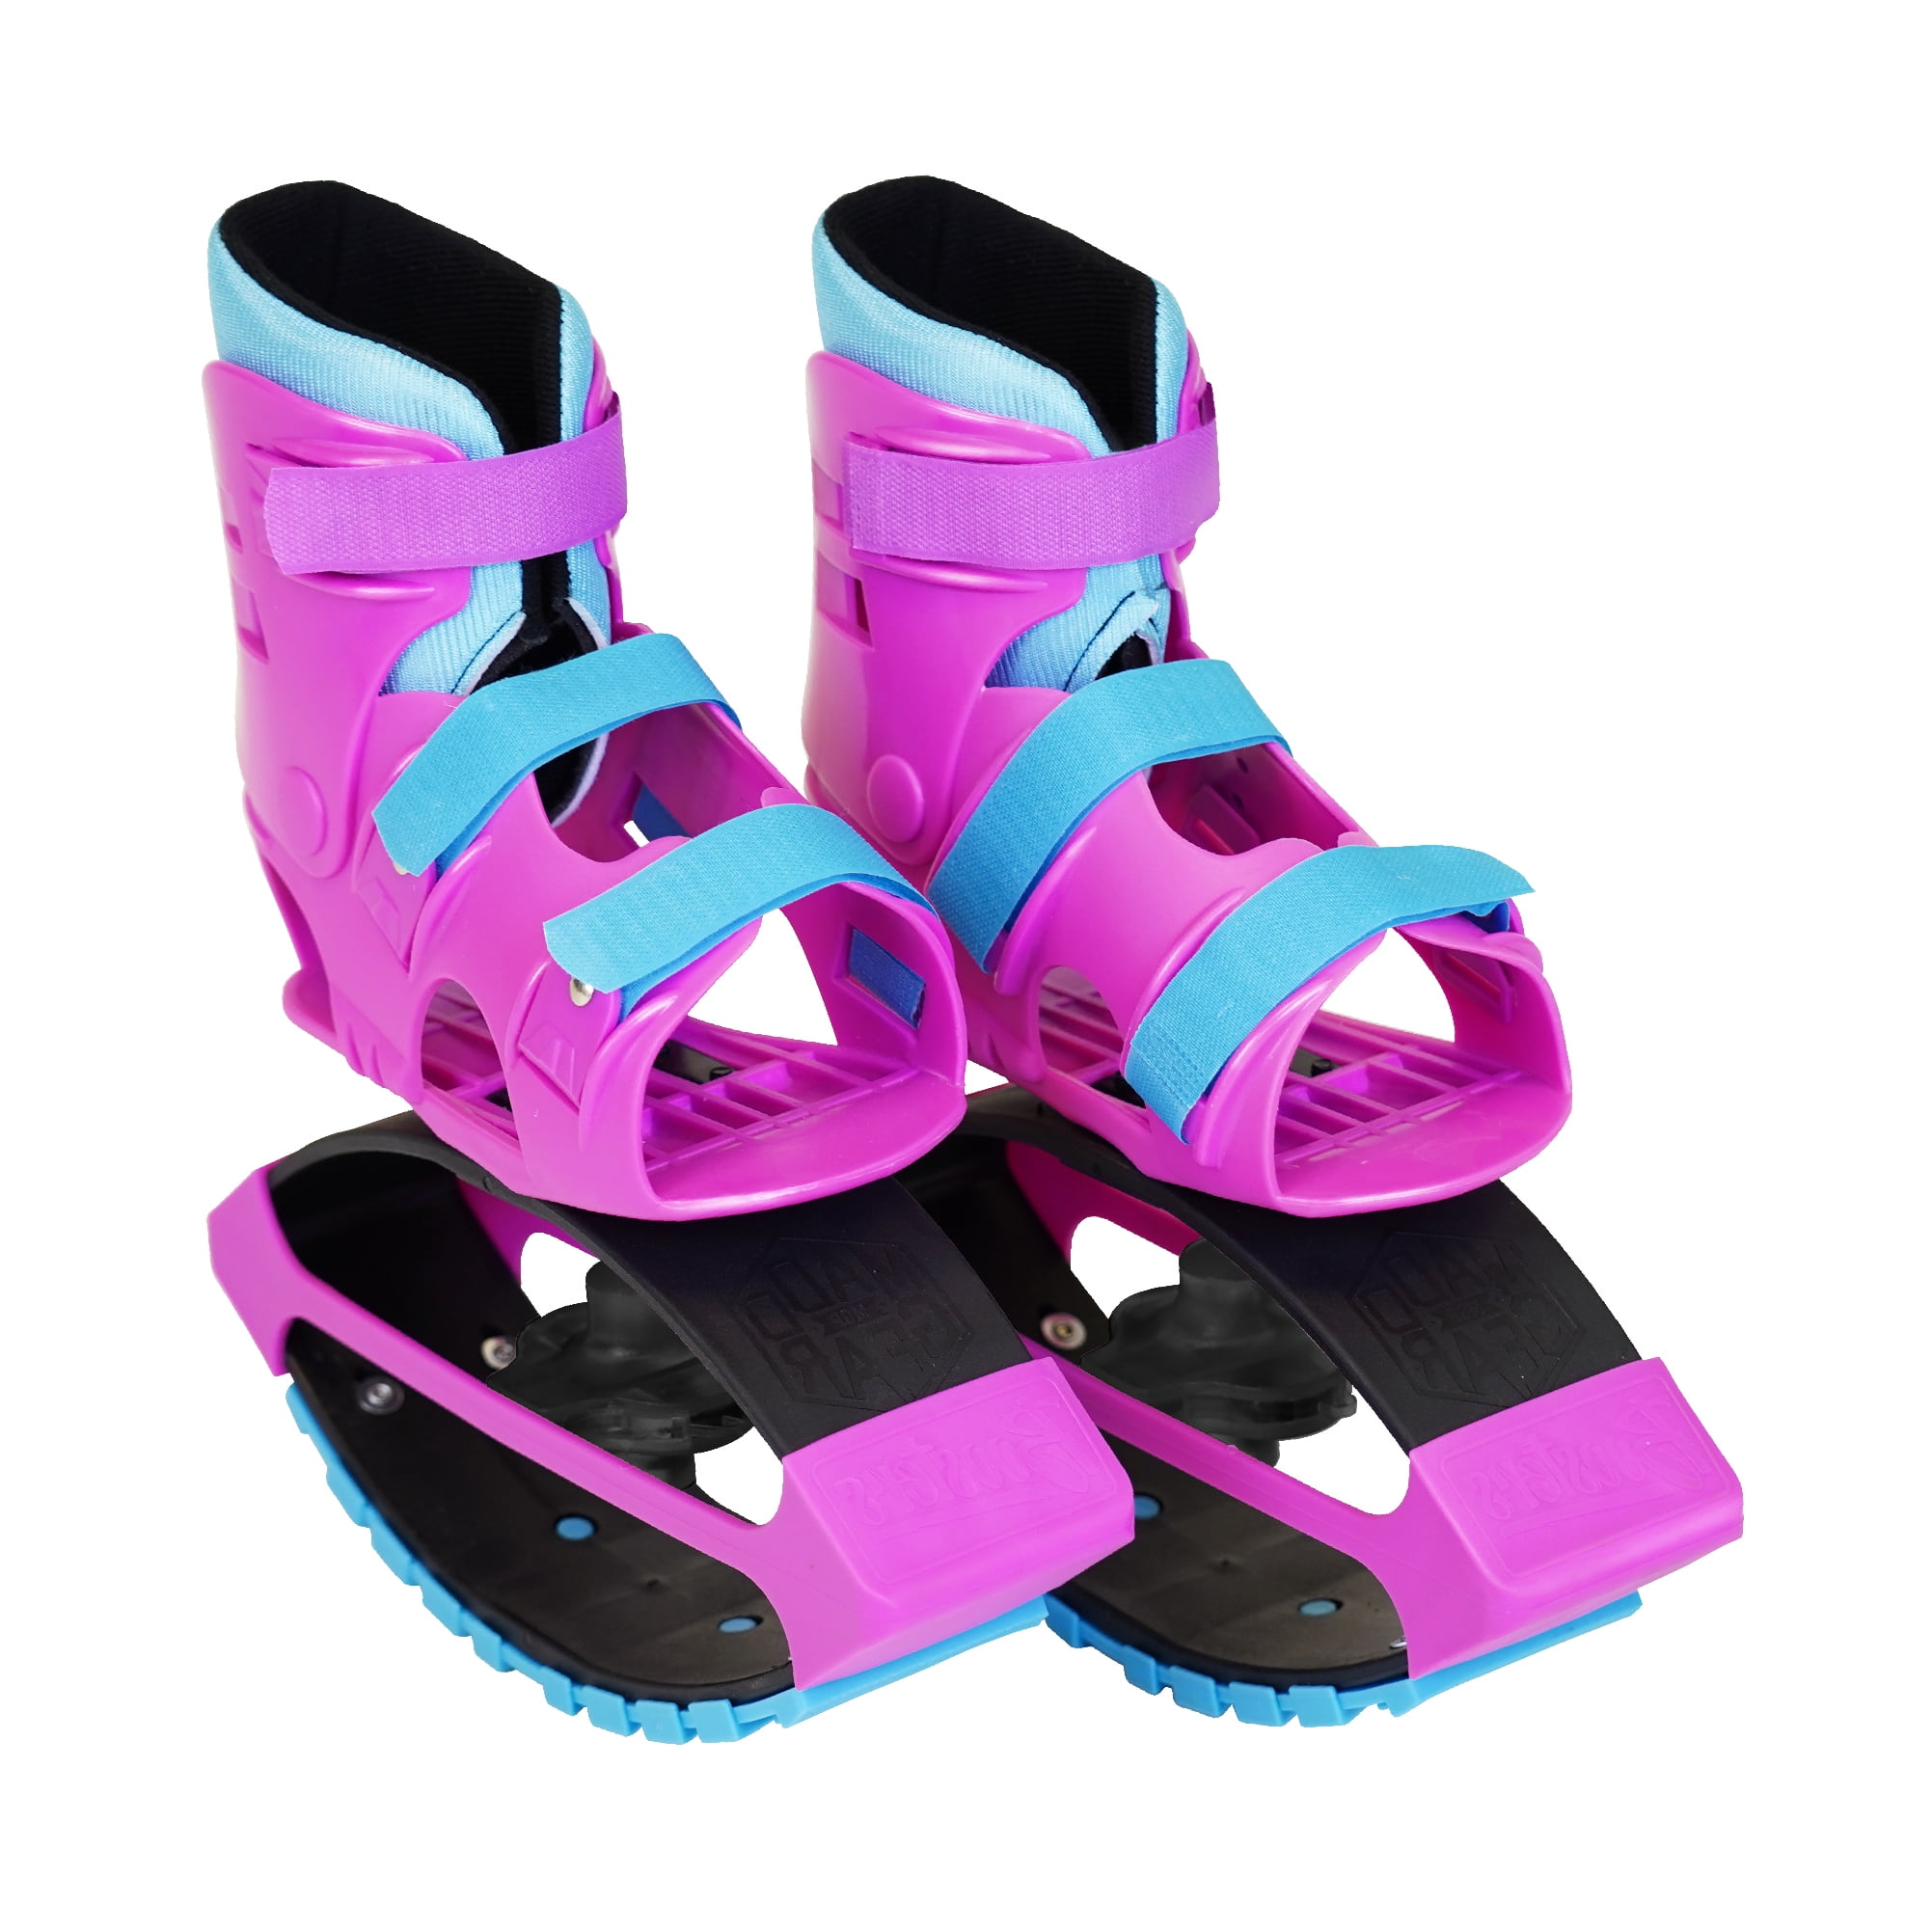 MADD Gear Boosters Bouncing BOOTS Purple & Black Rubber Soles Youth Size 3-6 E1 for sale online 